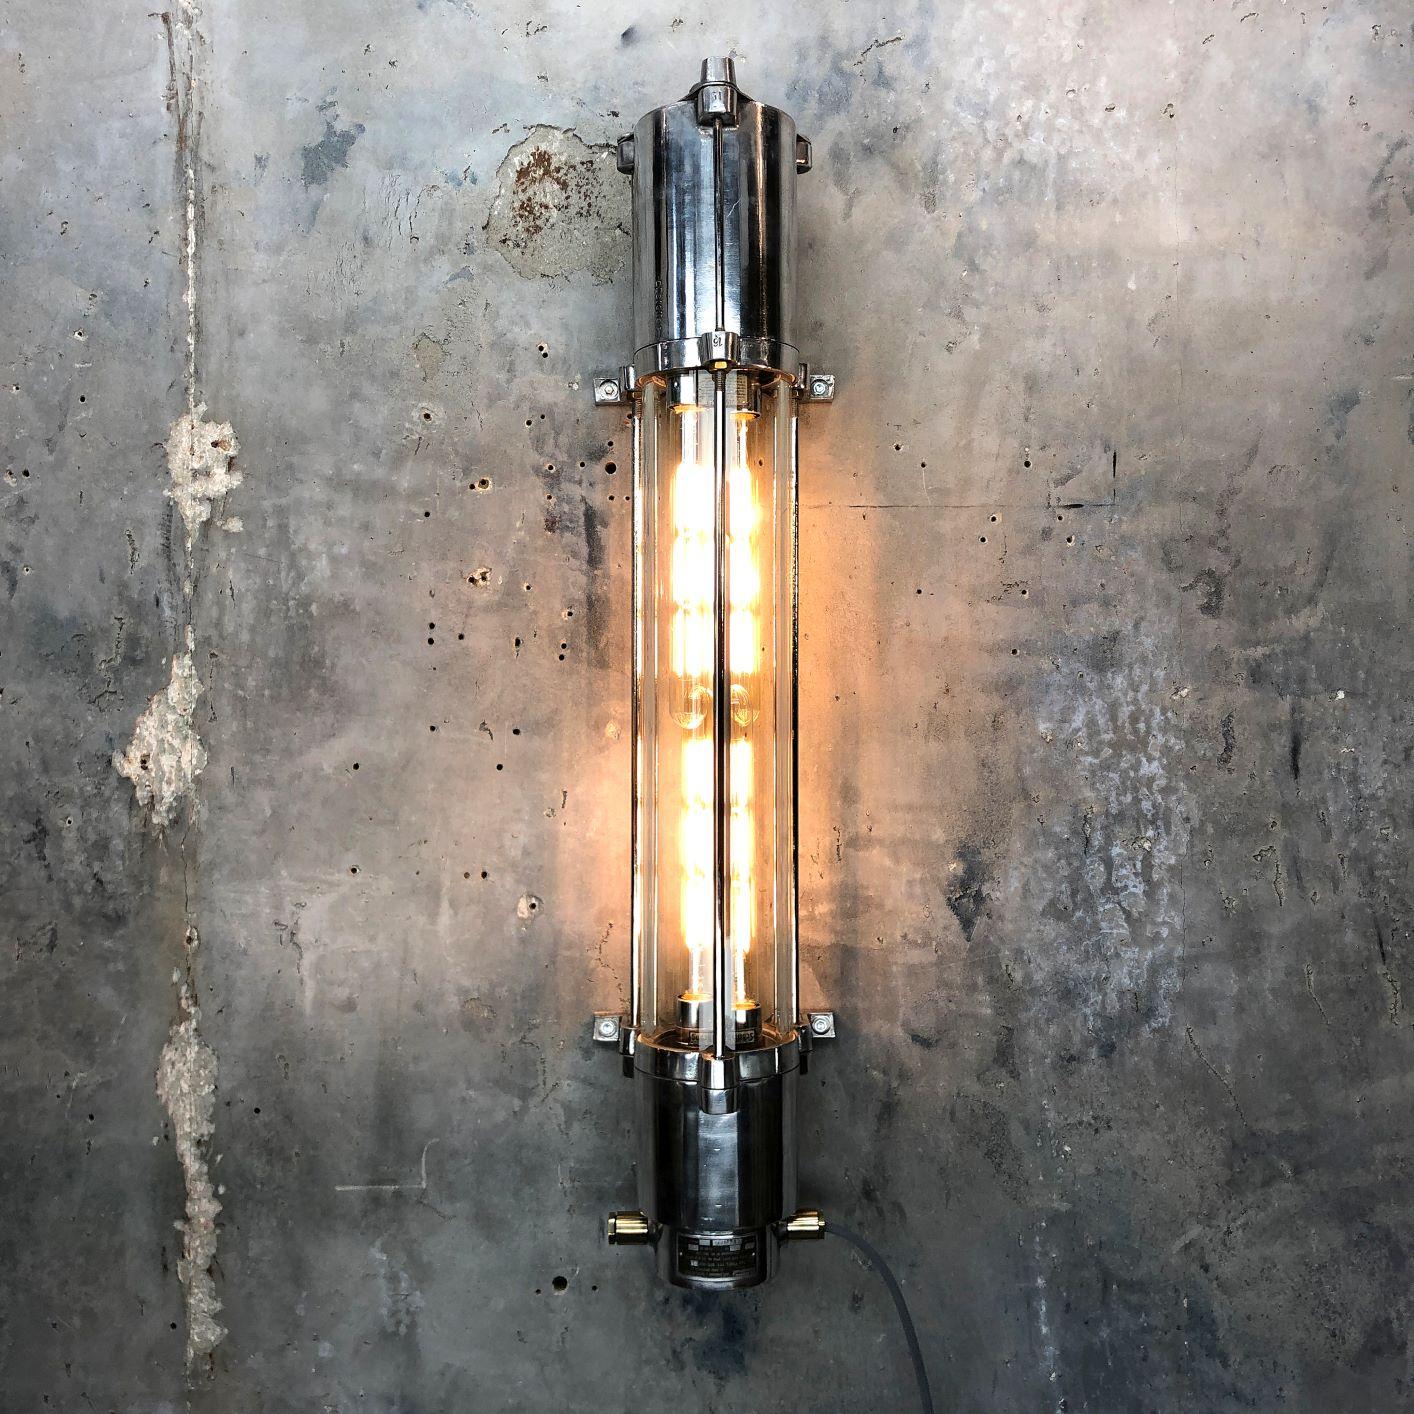 Industrial 1970s German Wall Mounted Aluminium and Glass Explosion Proof Edison Tube Light